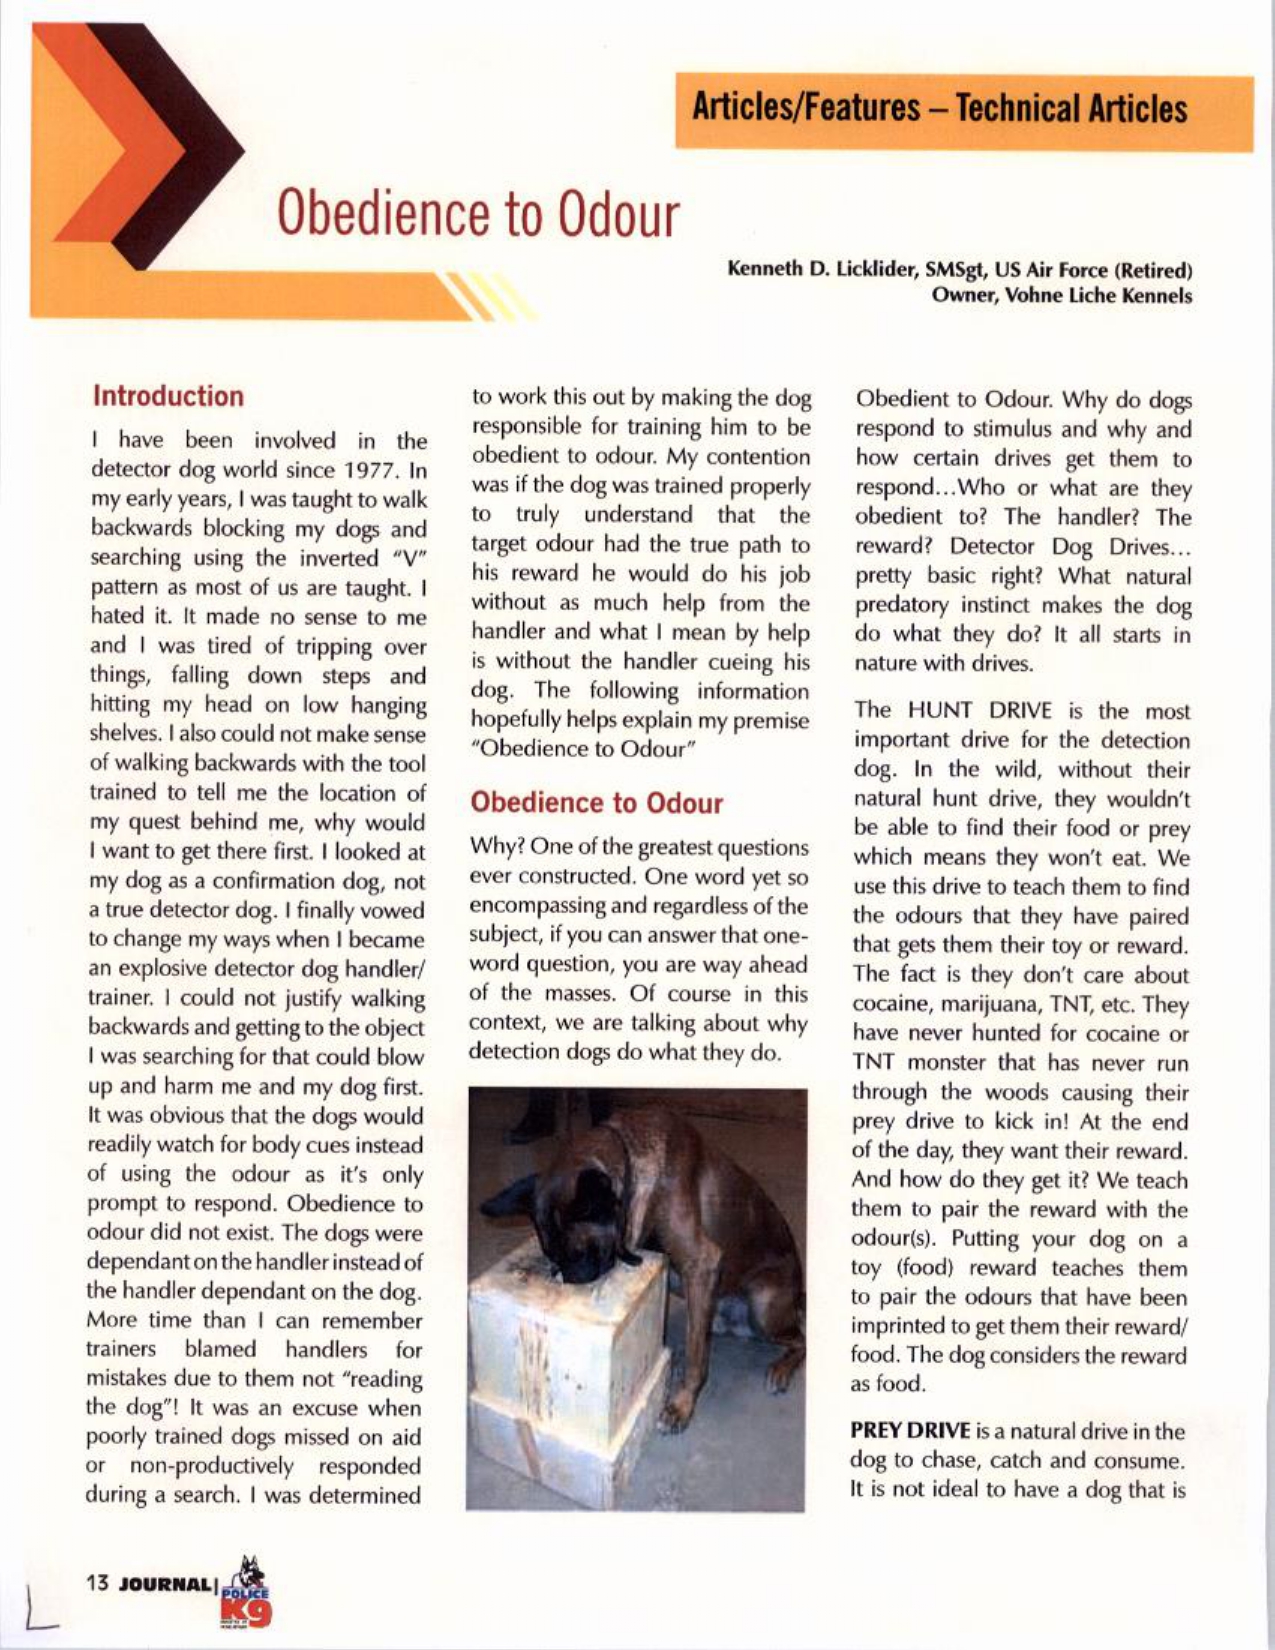 Obedience to Odour Article